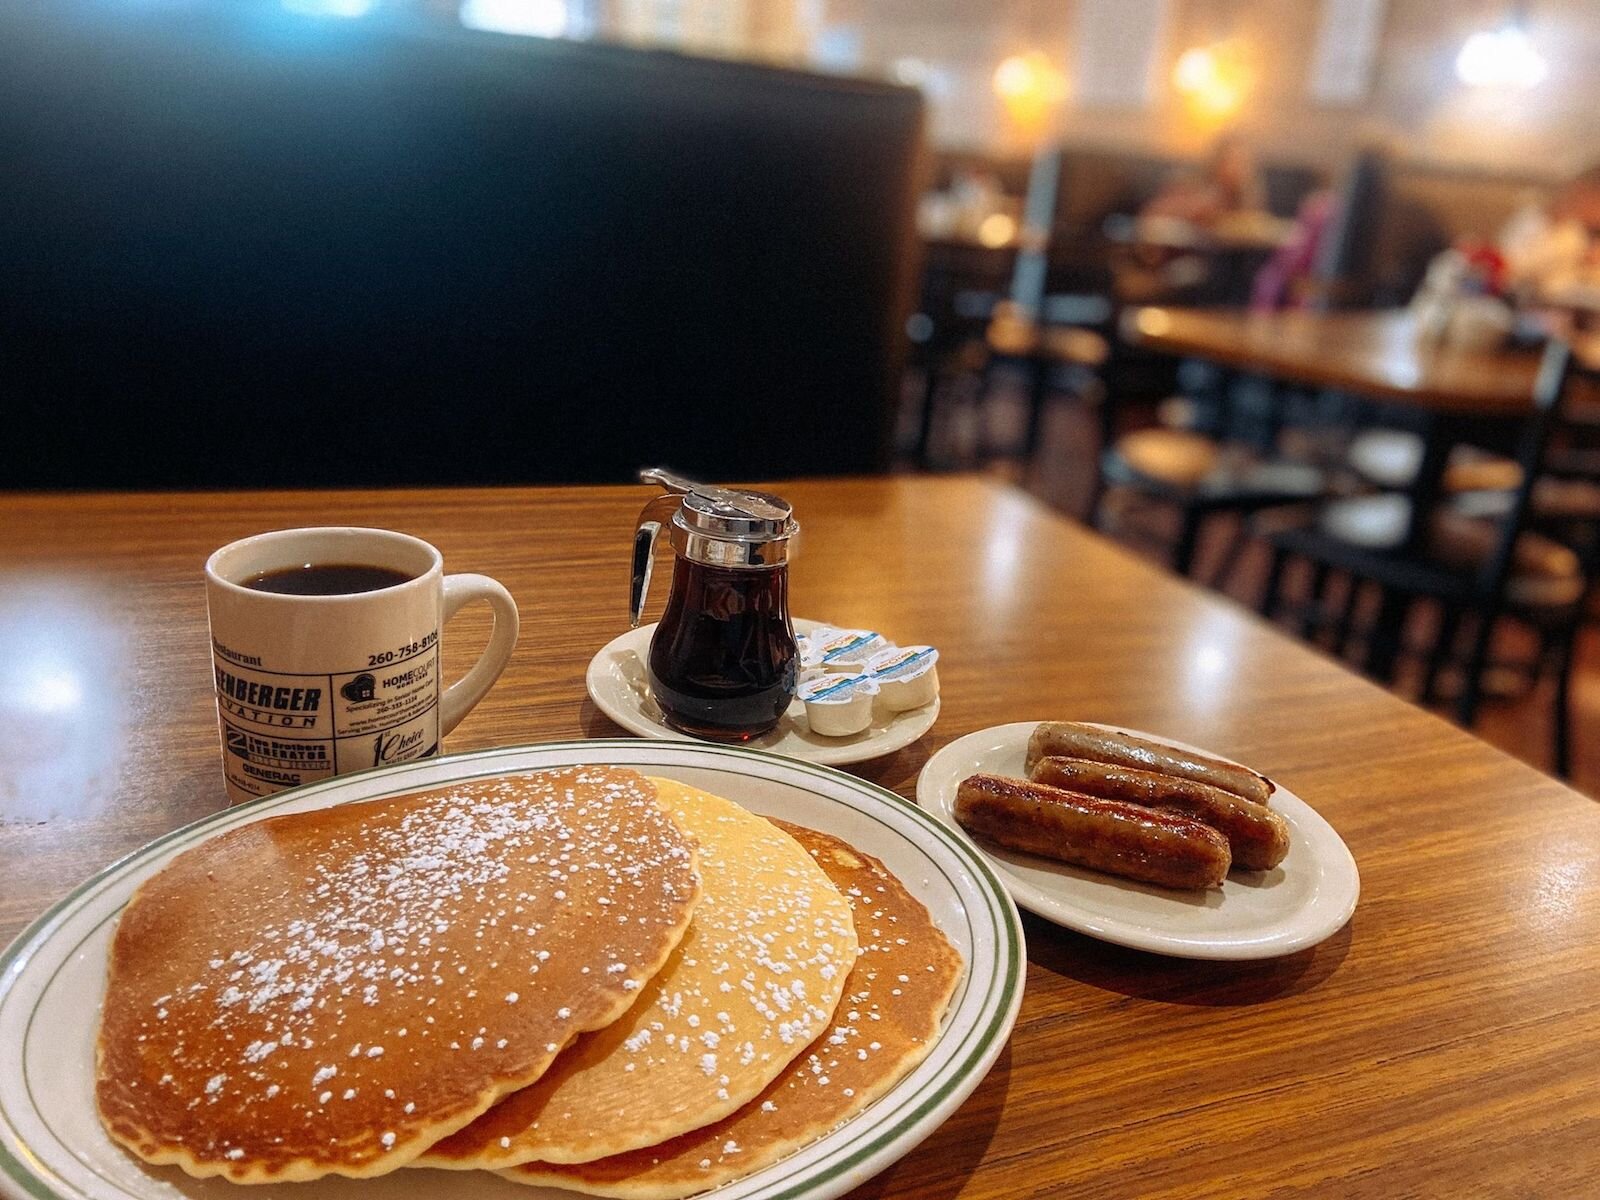 Markle’s Pancake House has a large menu with low prices and generous portions.